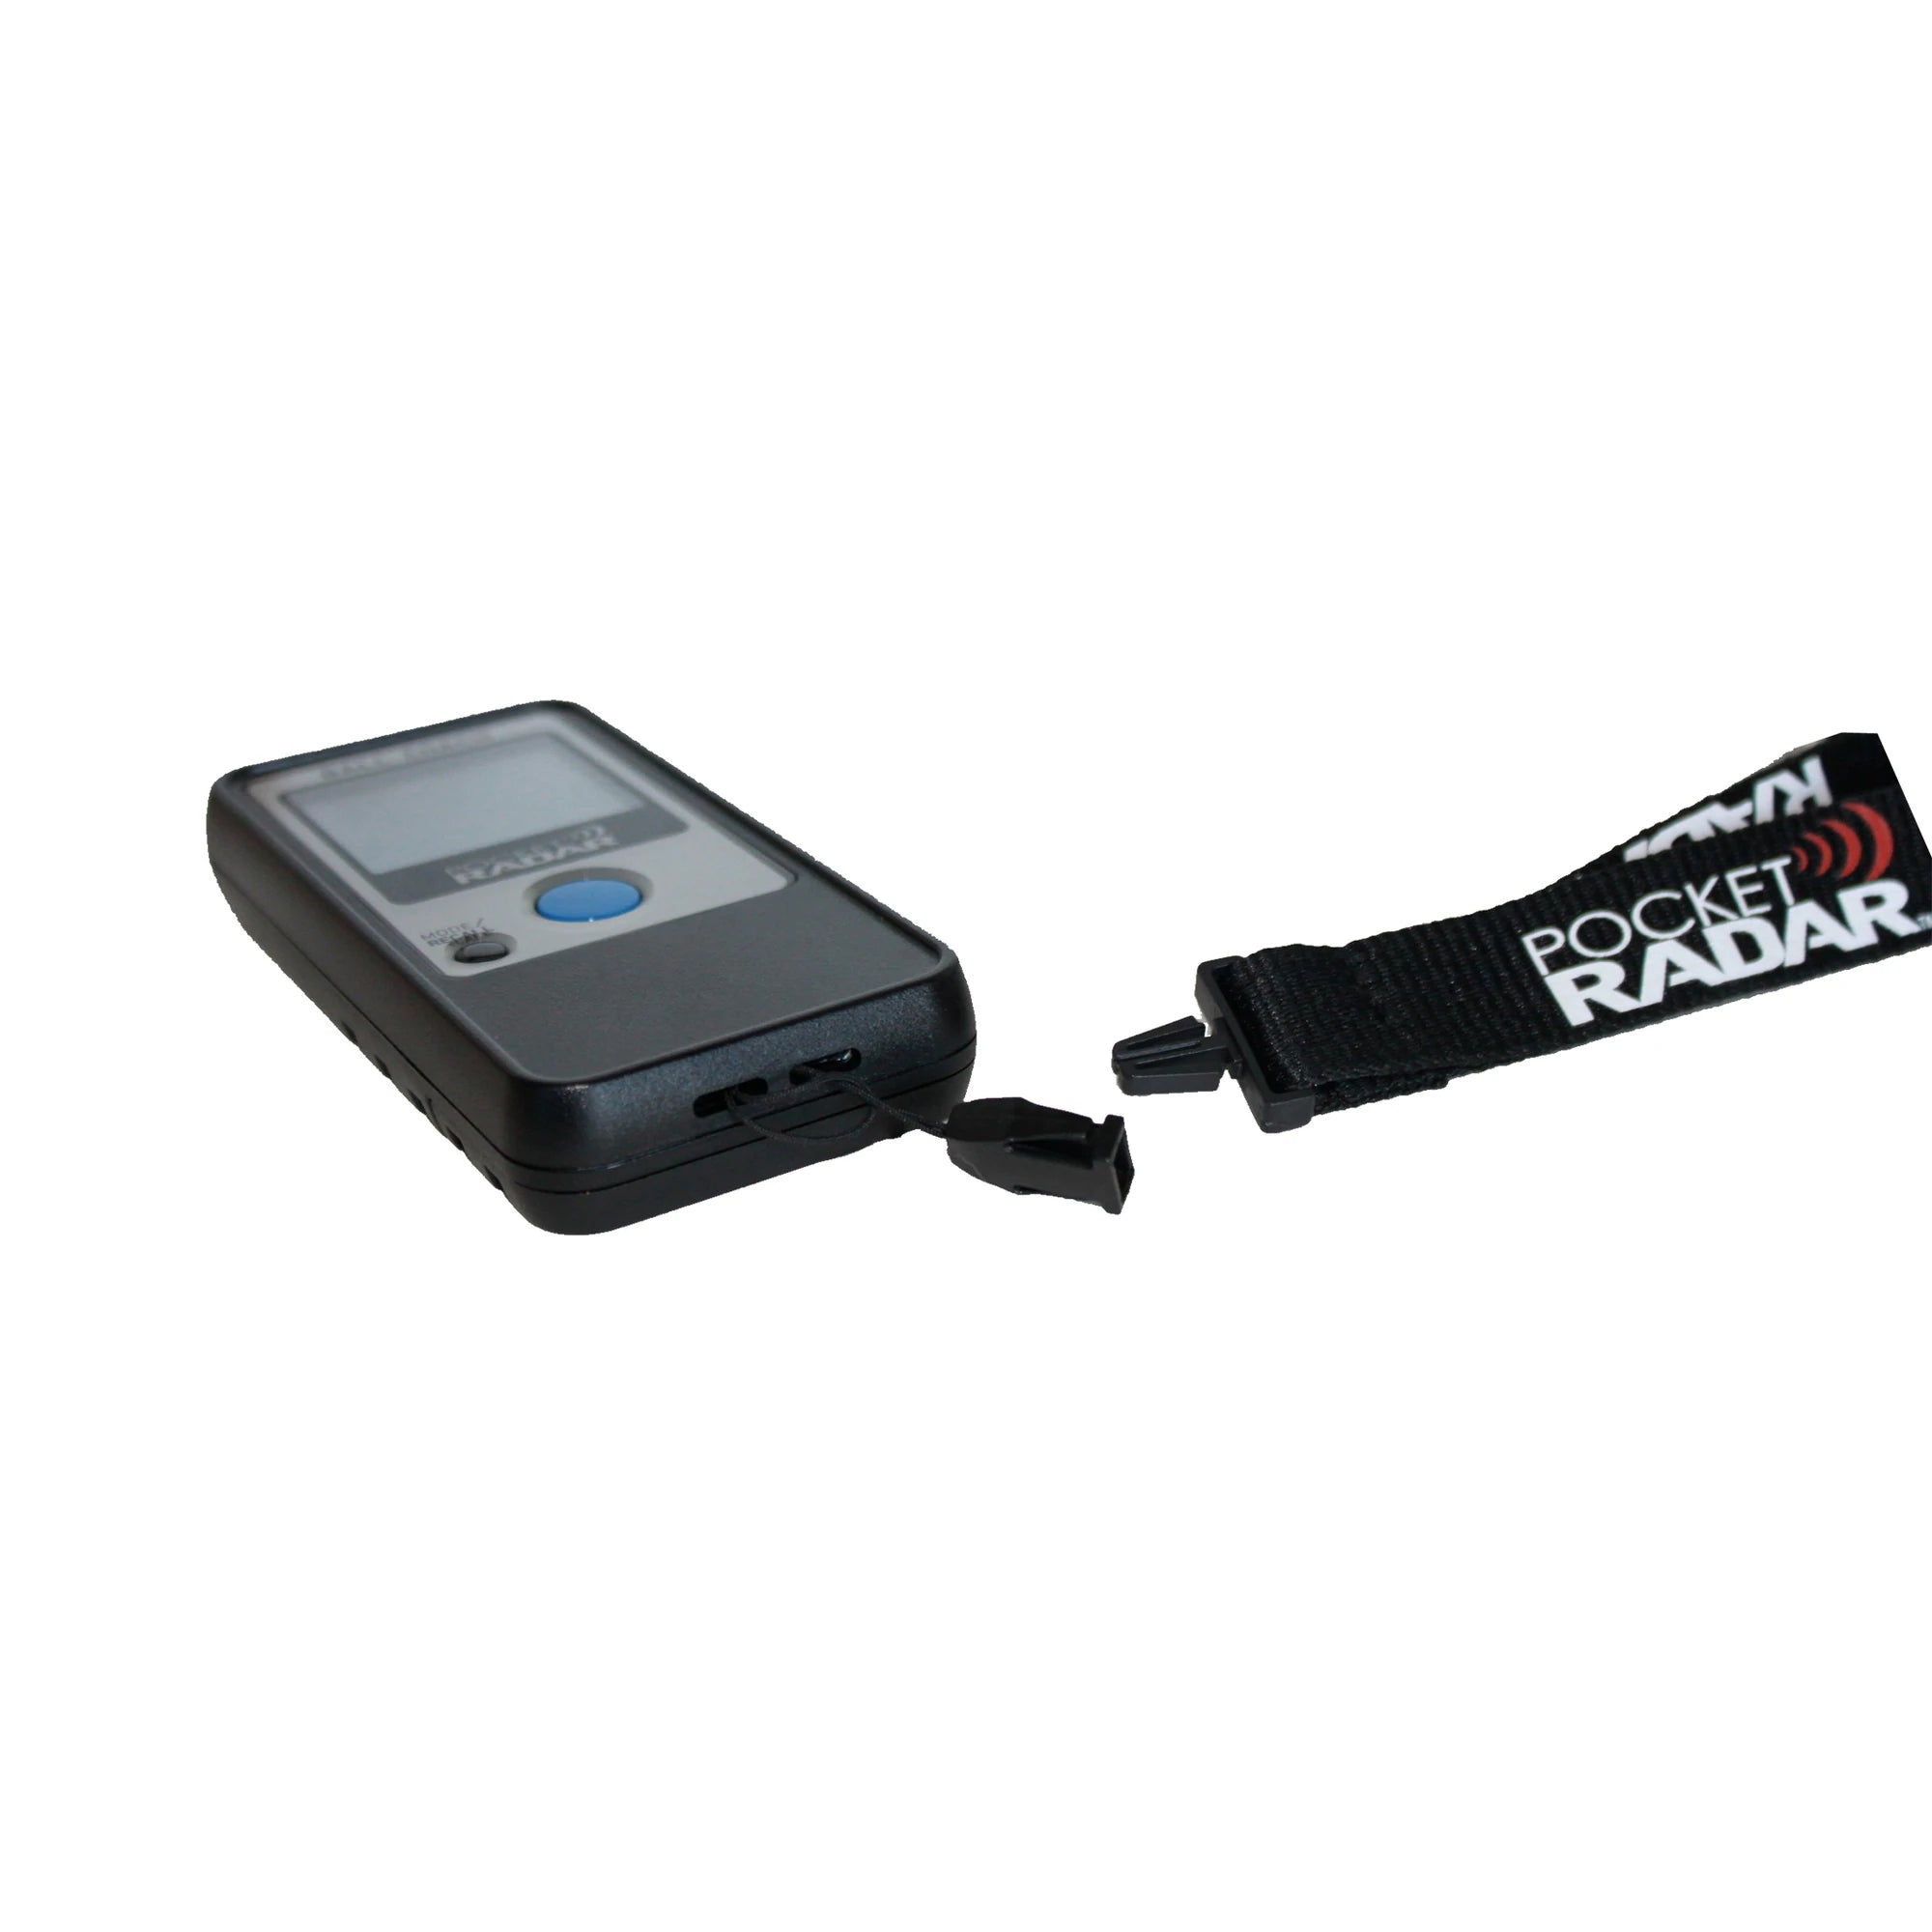 Lanyard for all Pocket Sized Radars with Device Close Up